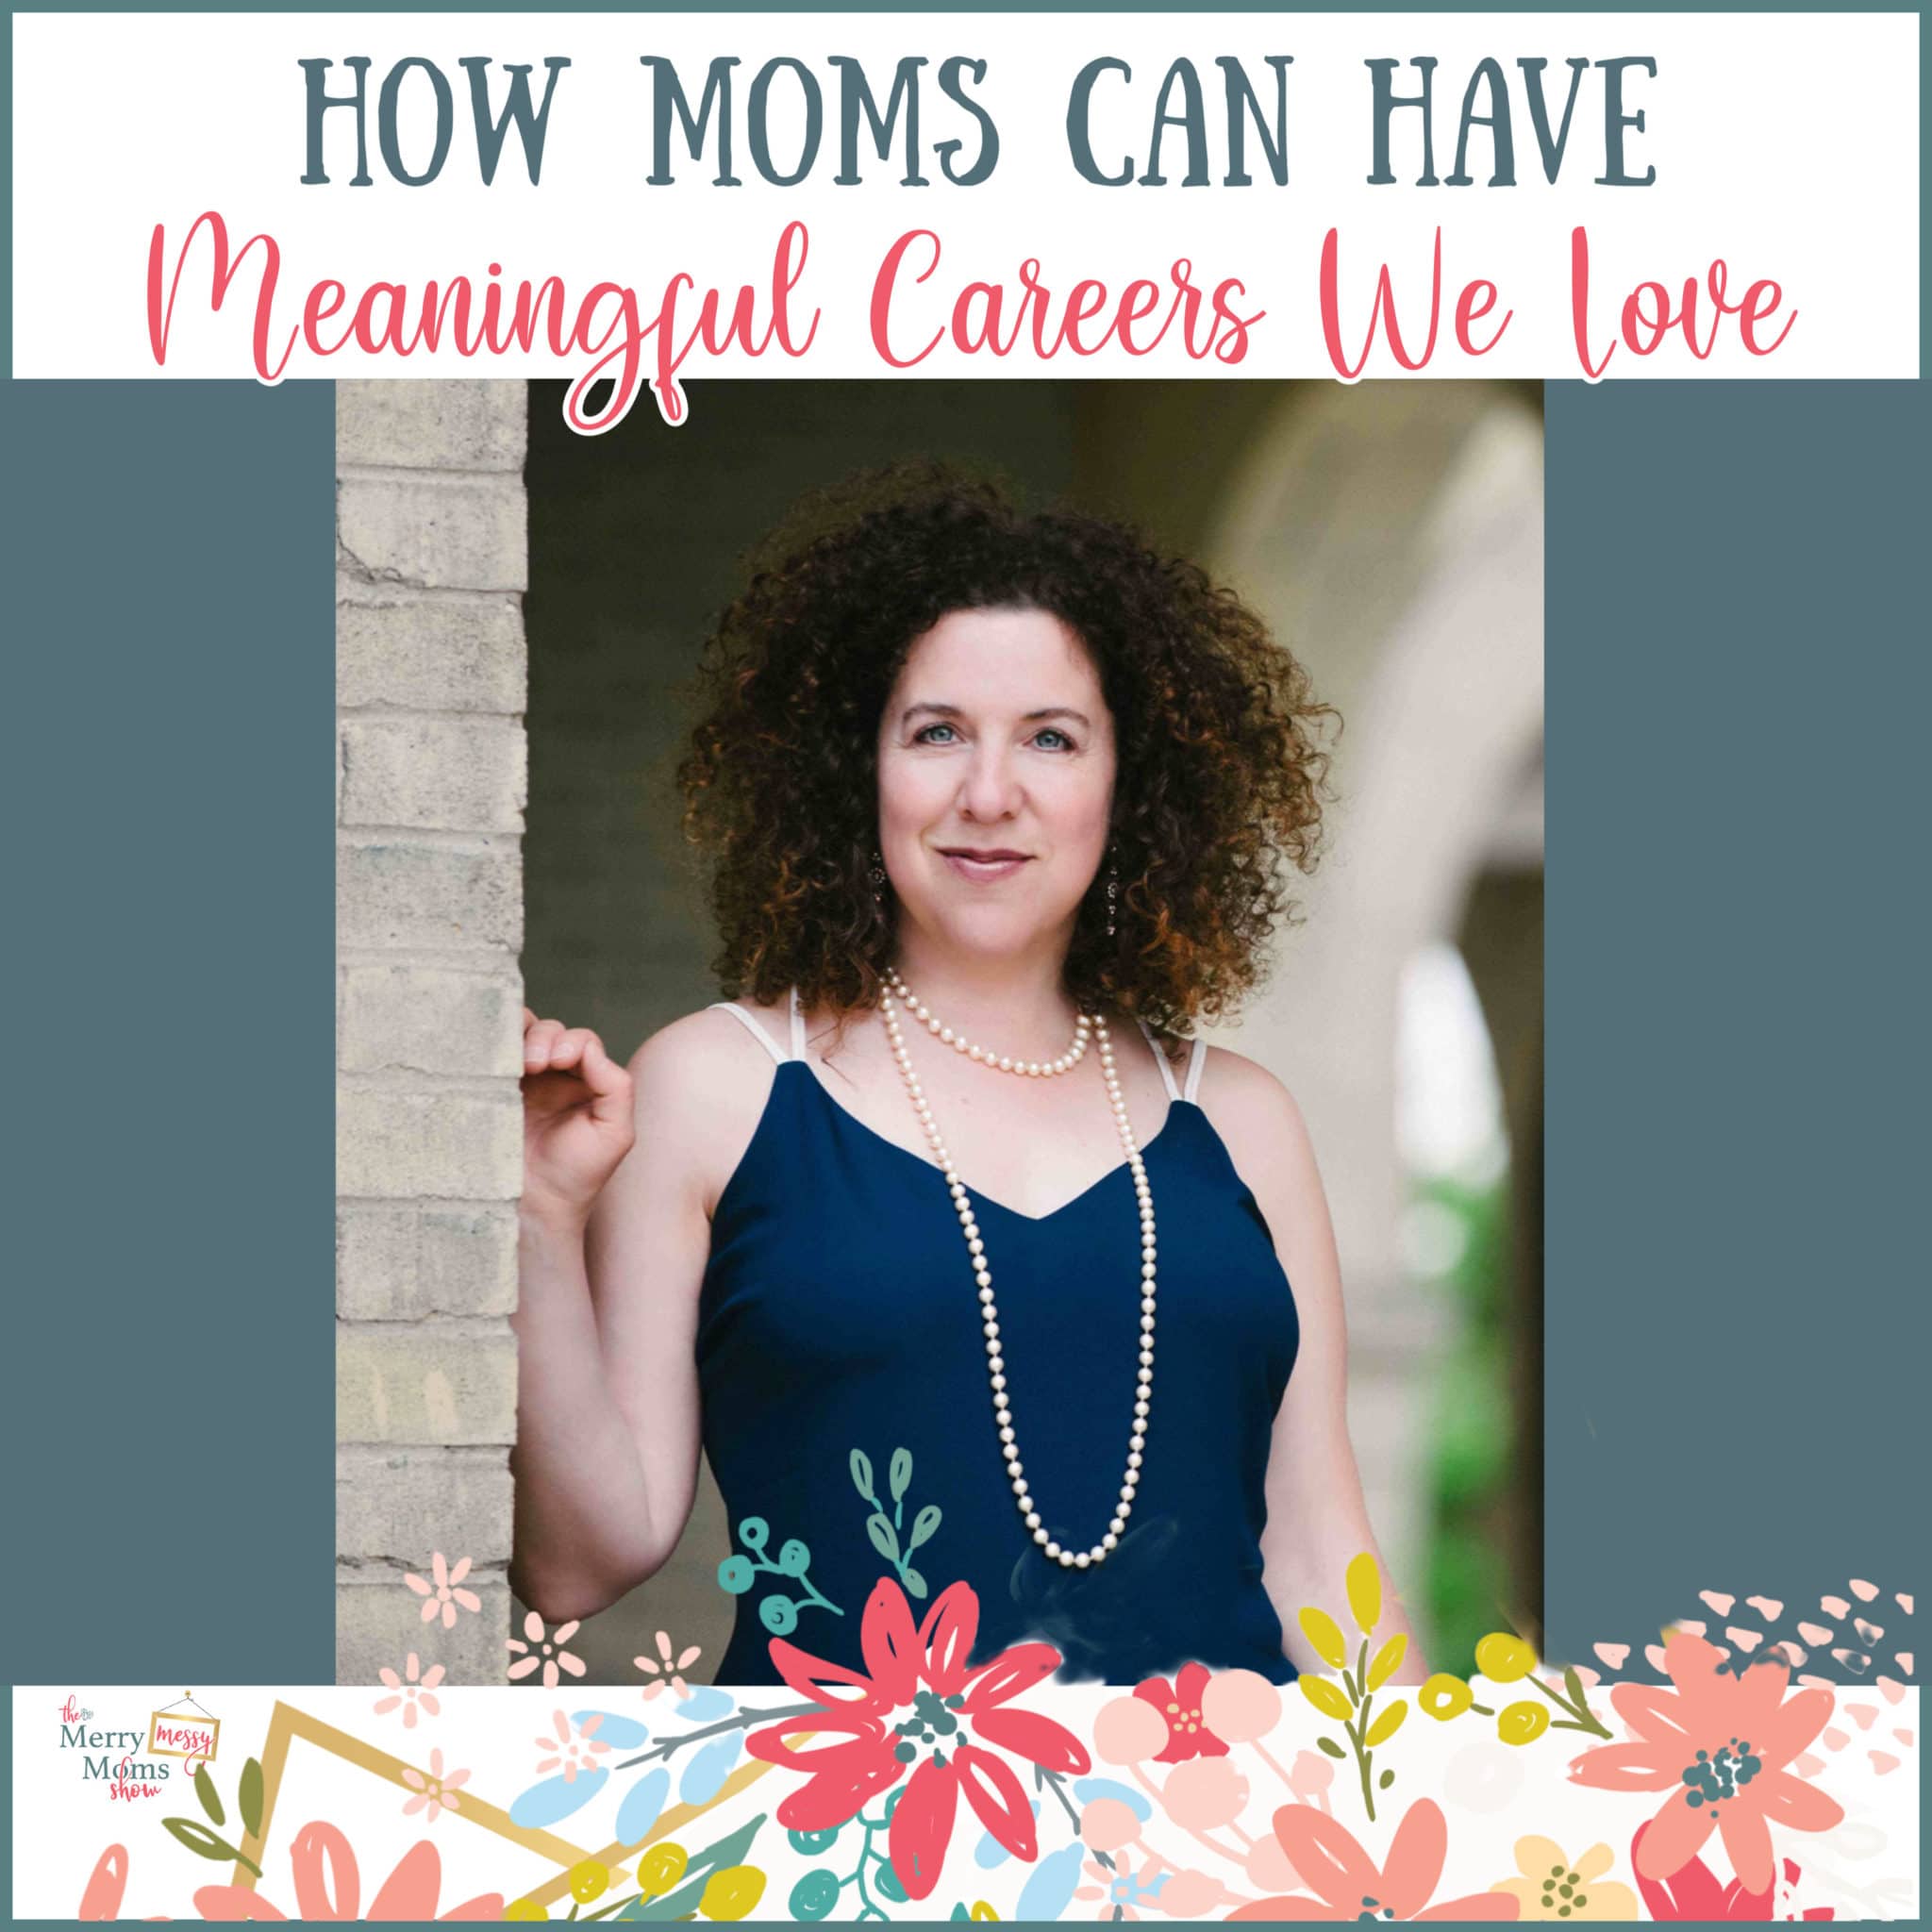 How Moms Can Have a Meaningful Career We Love